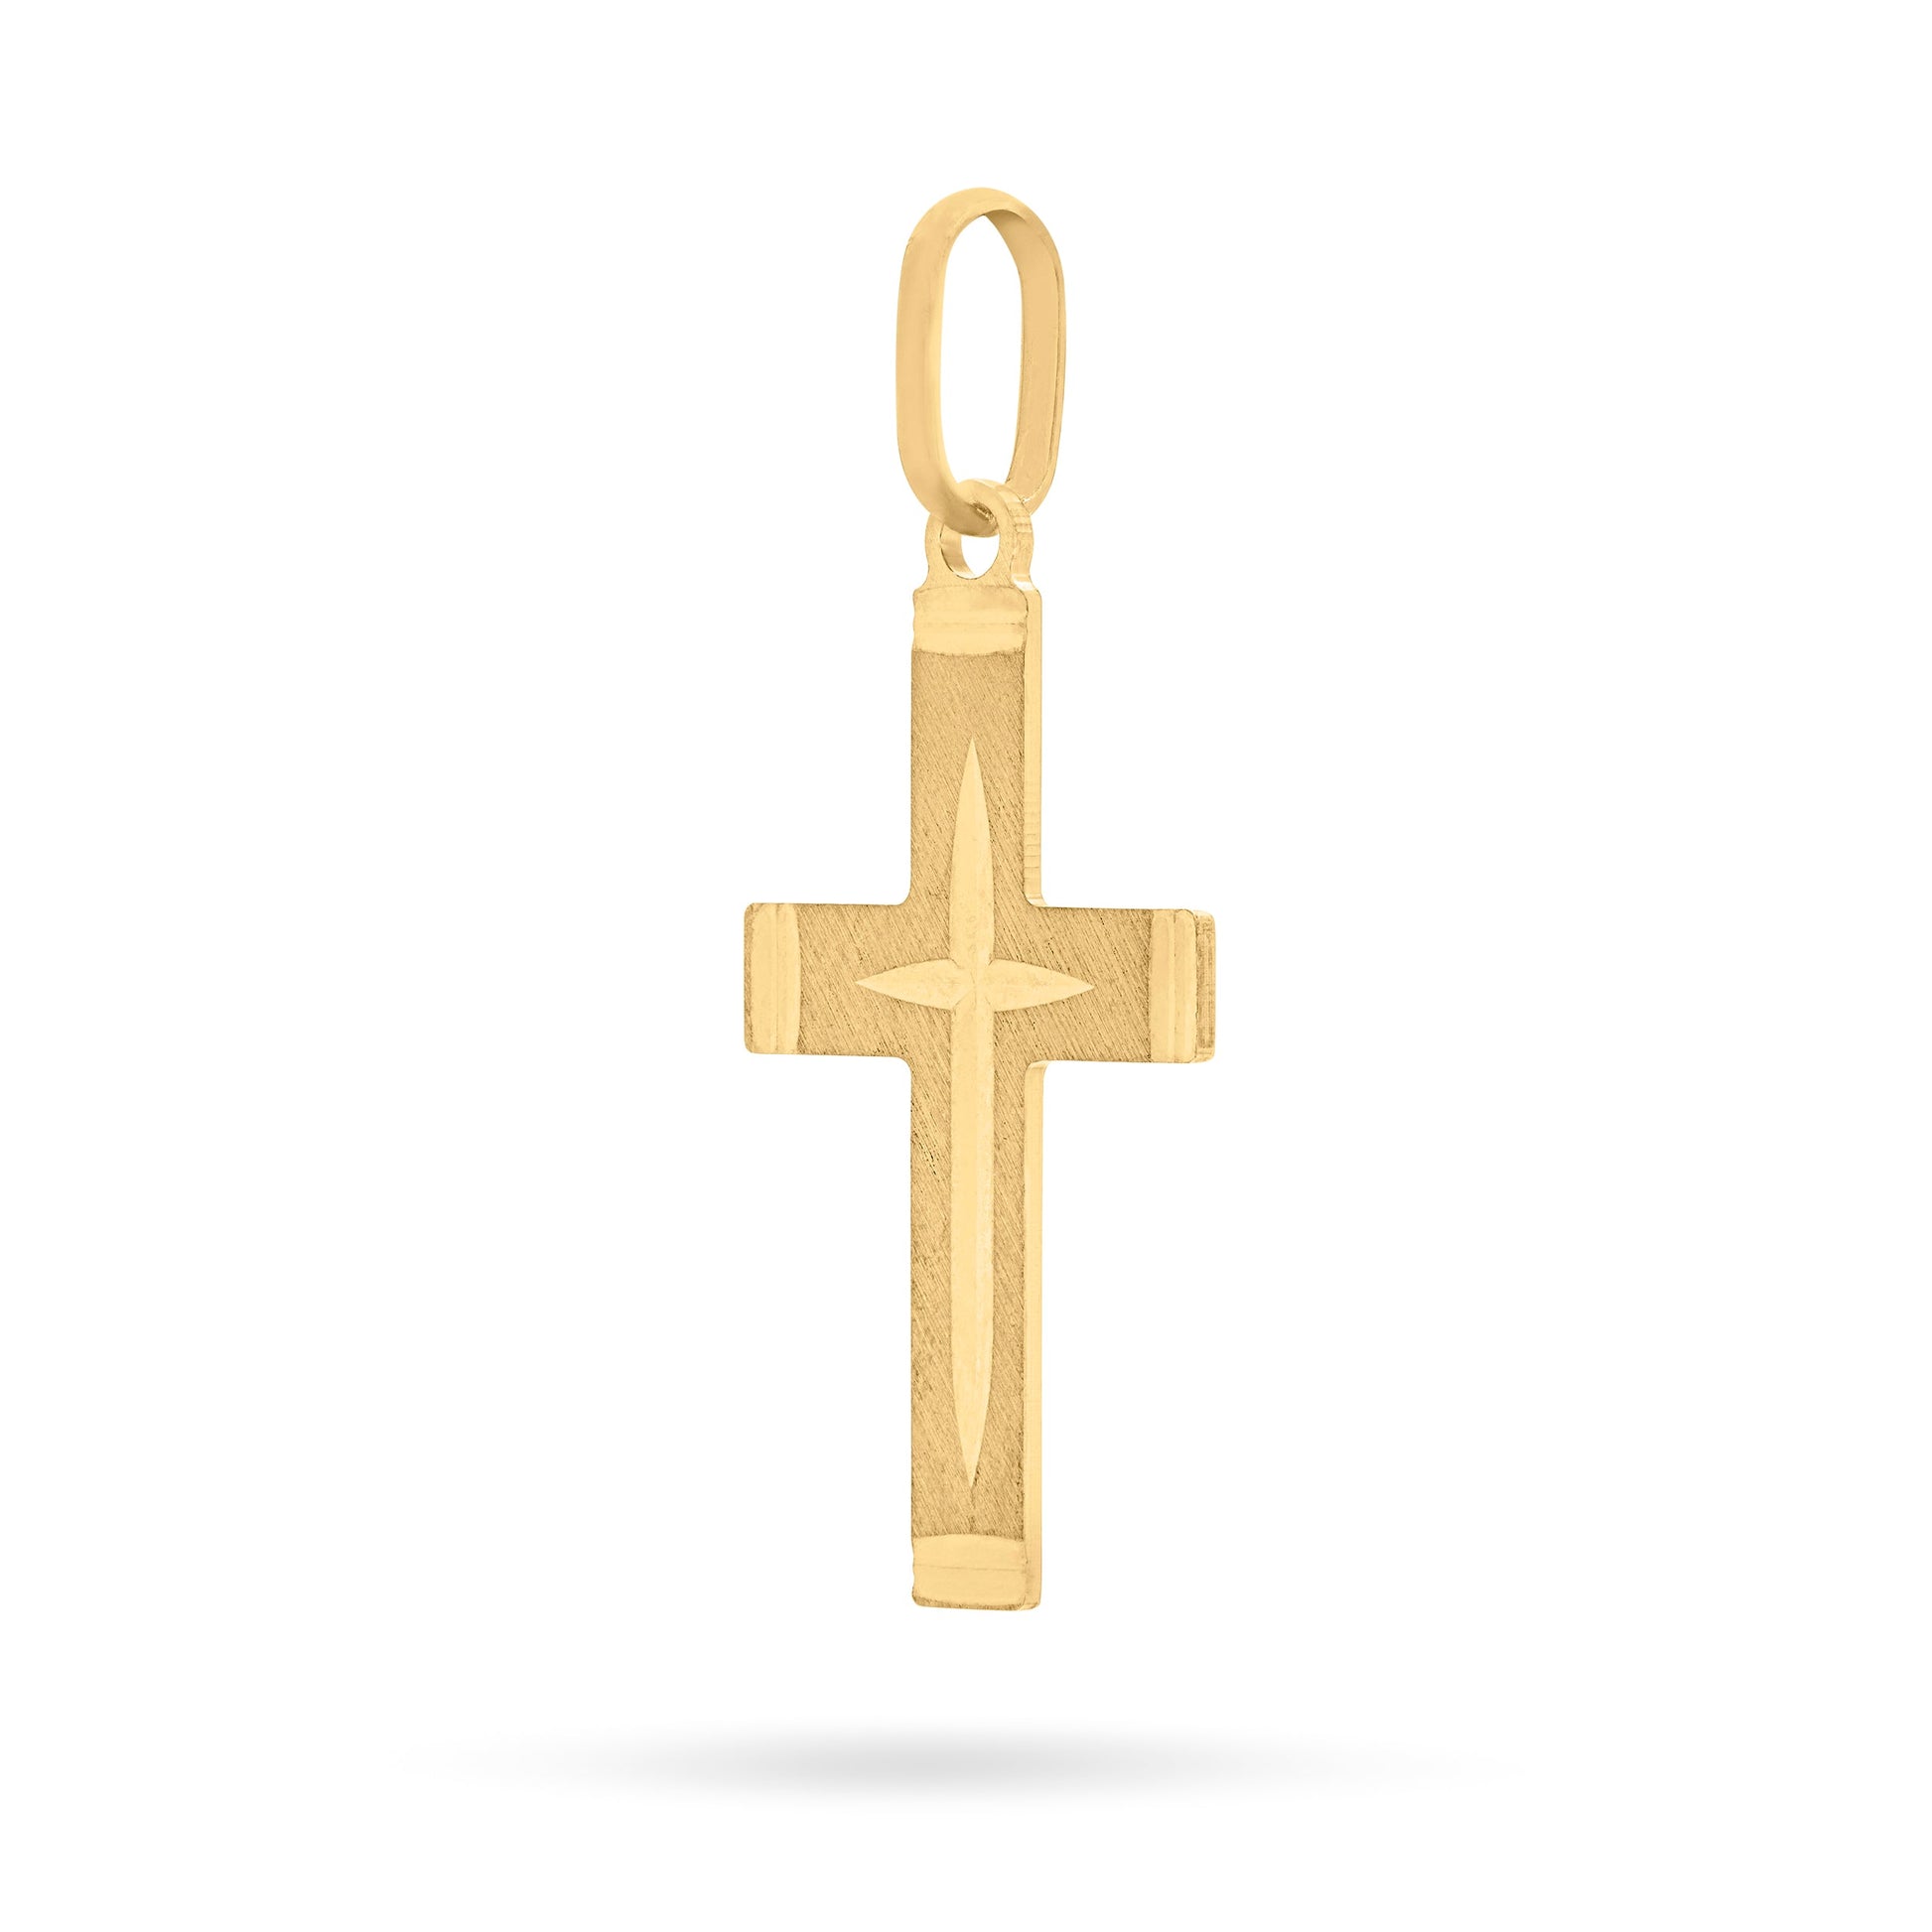 Mondo Cattolico Pendant 21 mm (0.83 in) Brushed Gold-plated Sterling Silver Cross Pendant With Polished Ends and Interior